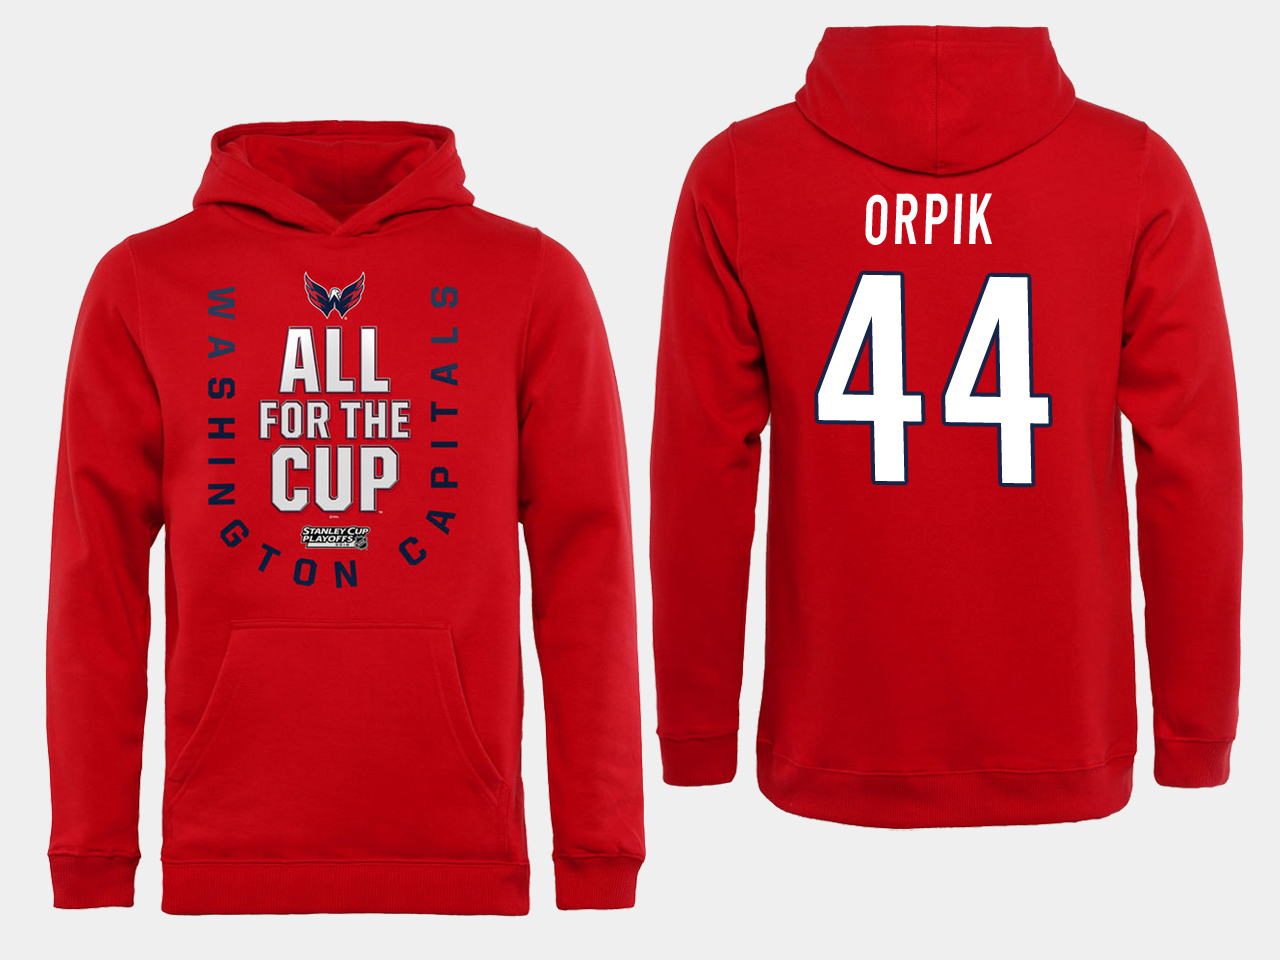 Men NHL Washington Capitals #44 Orpik Red All for the Cup Hoodie->washington capitals->NHL Jersey